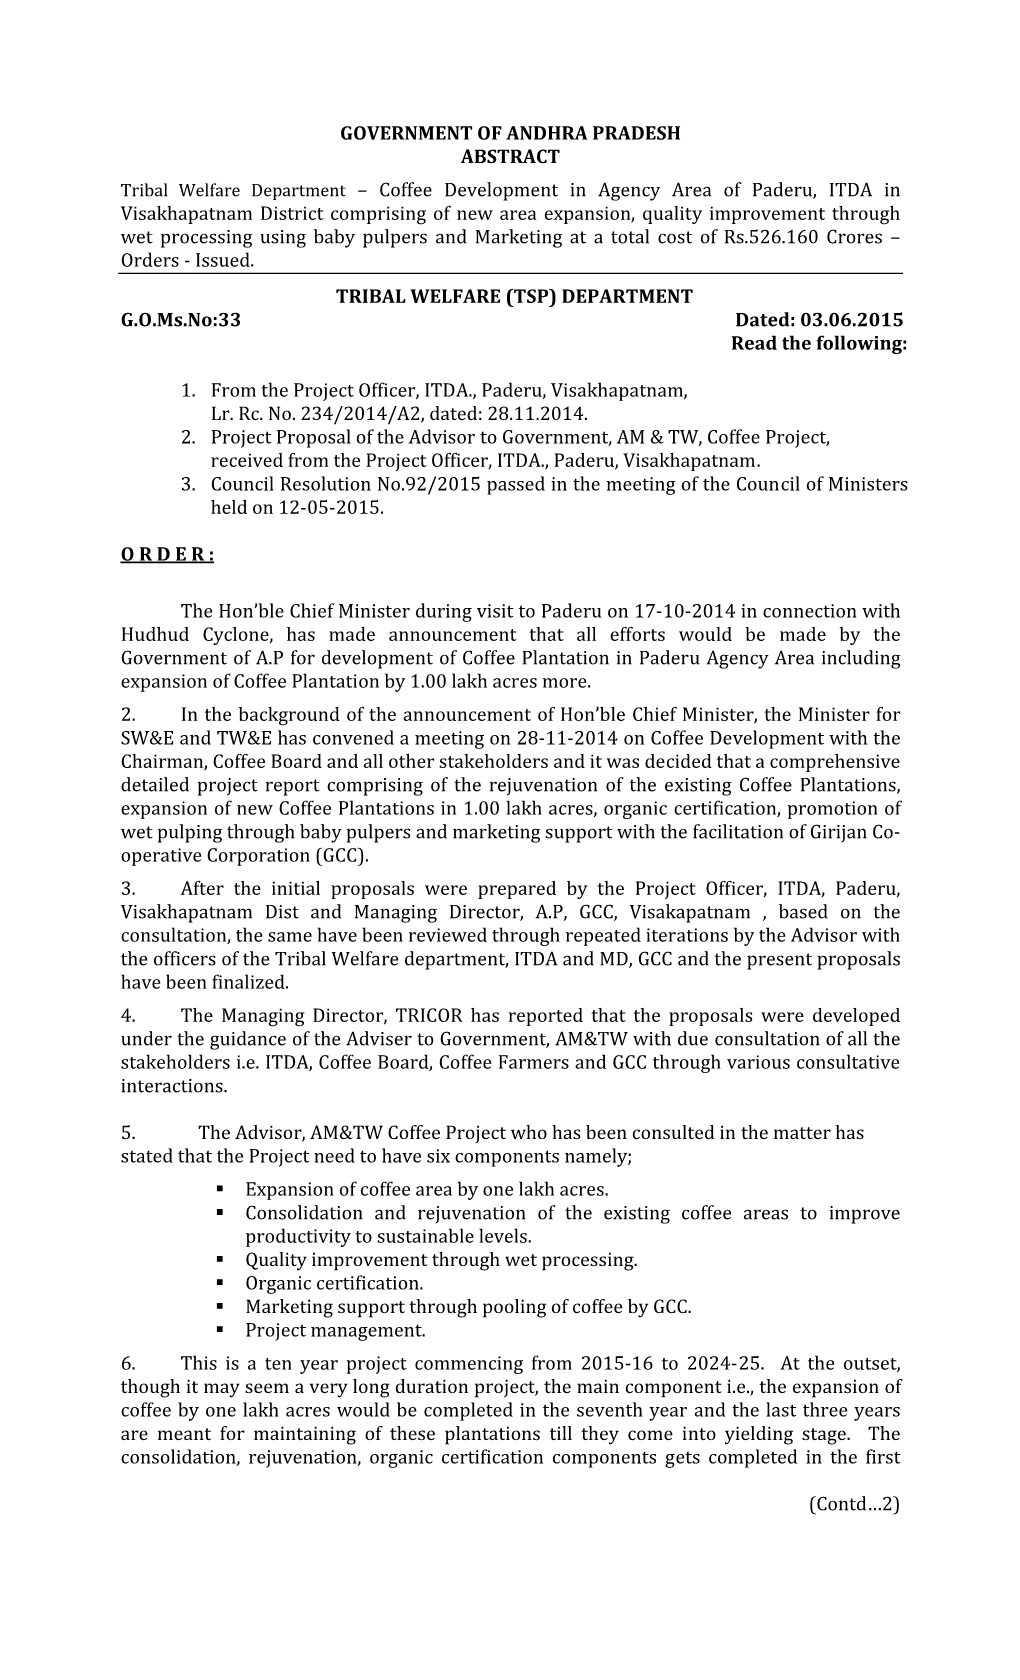 GOVERNMENT of ANDHRA PRADESH ABSTRACT – Coffee Development in Agency Area of Paderu, ITDA in Visakhapatnam District Comprising